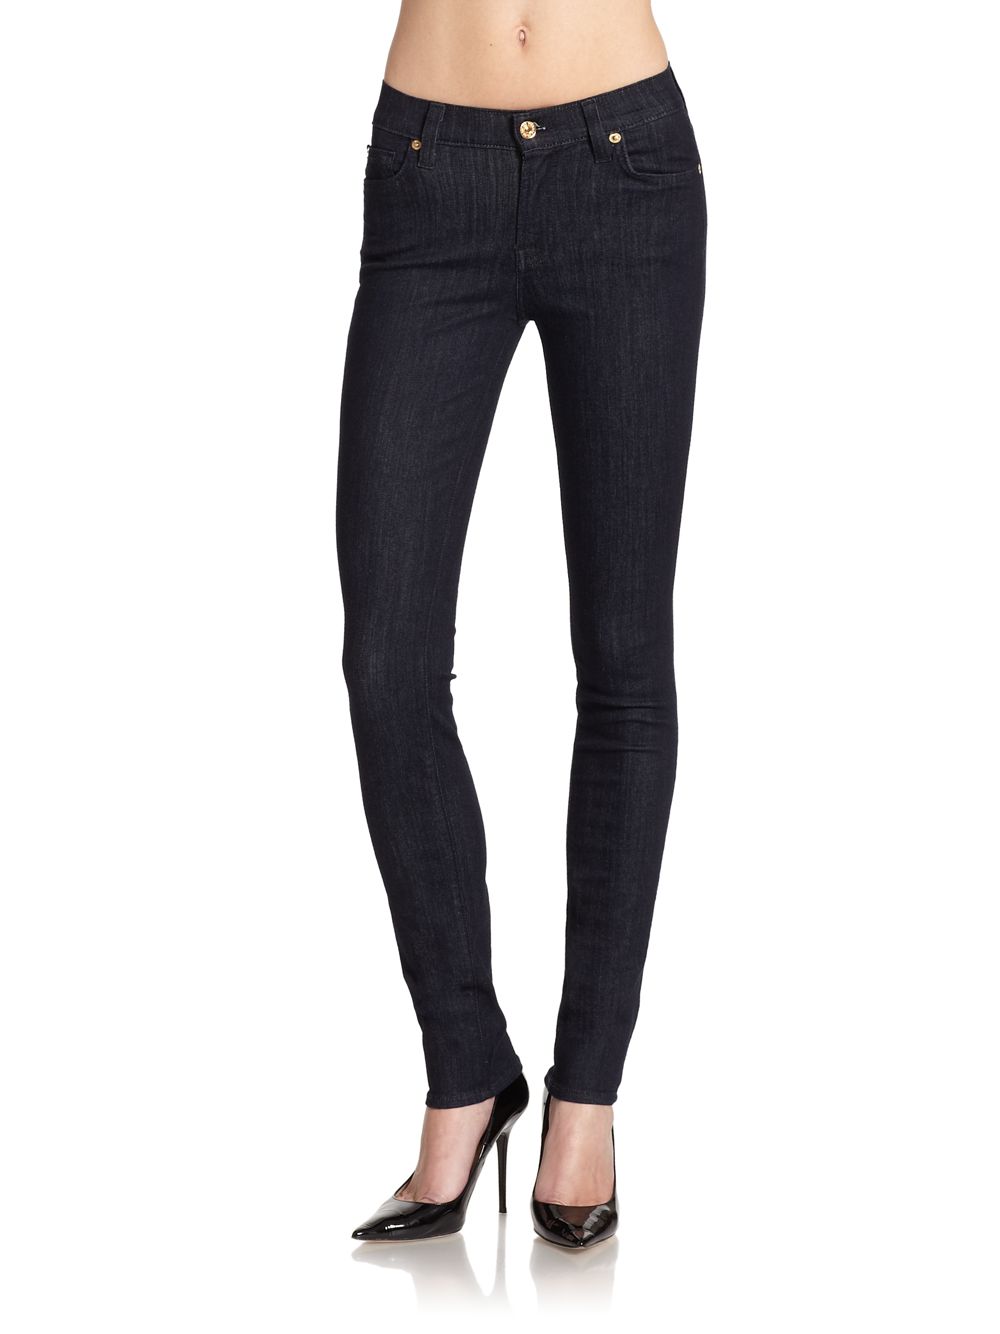 Lyst - 7 for all mankind Mid Rise Roxanne Skinny Jeans in Black